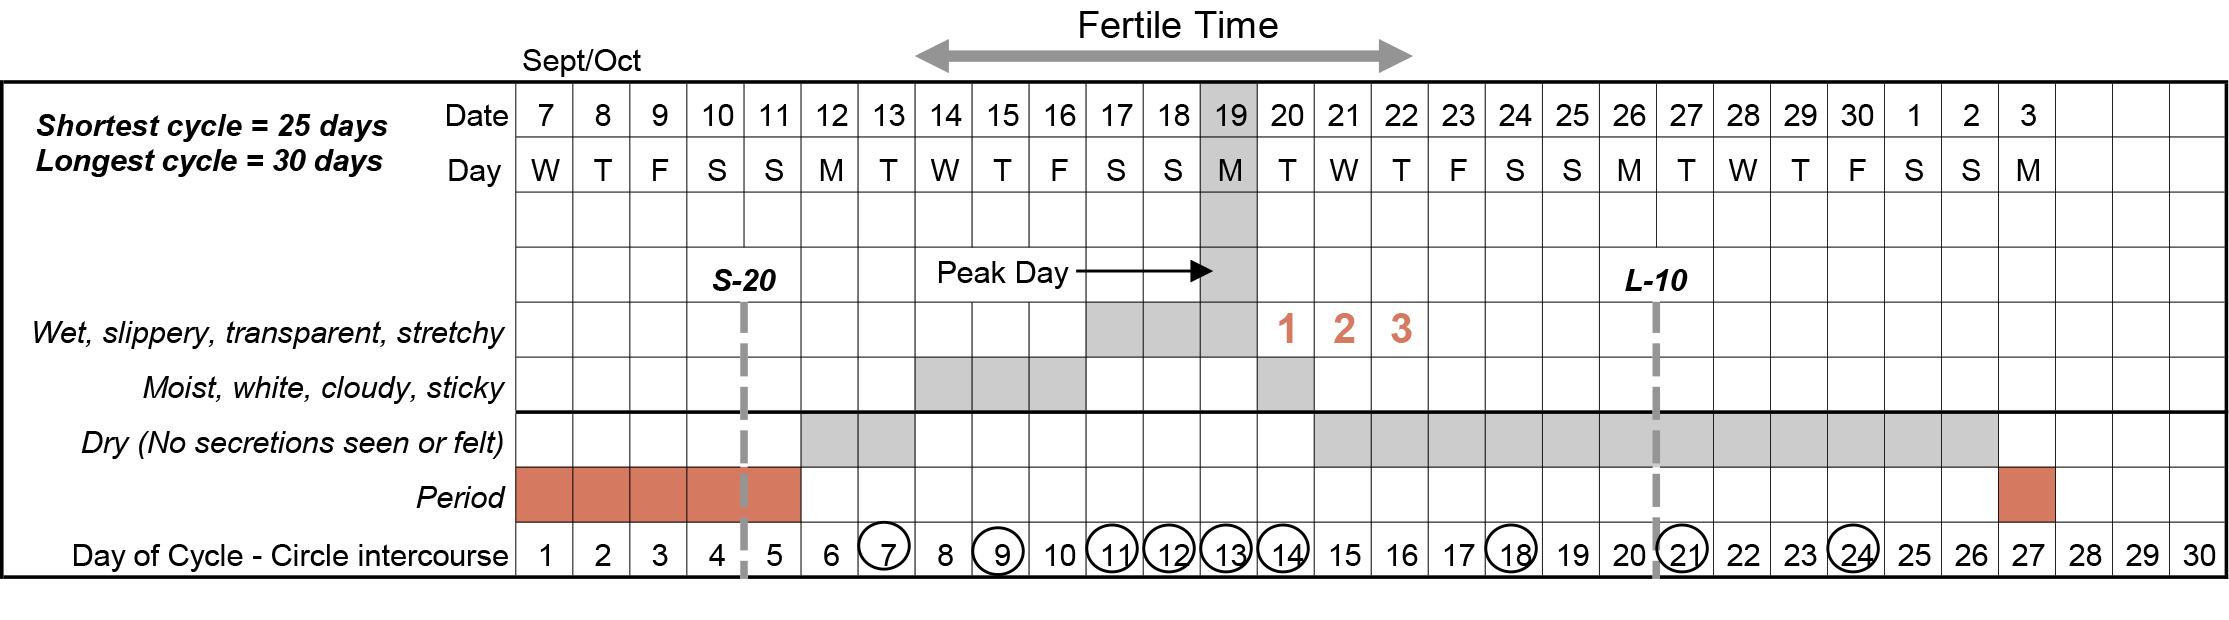 Best Time To Conceive Chart